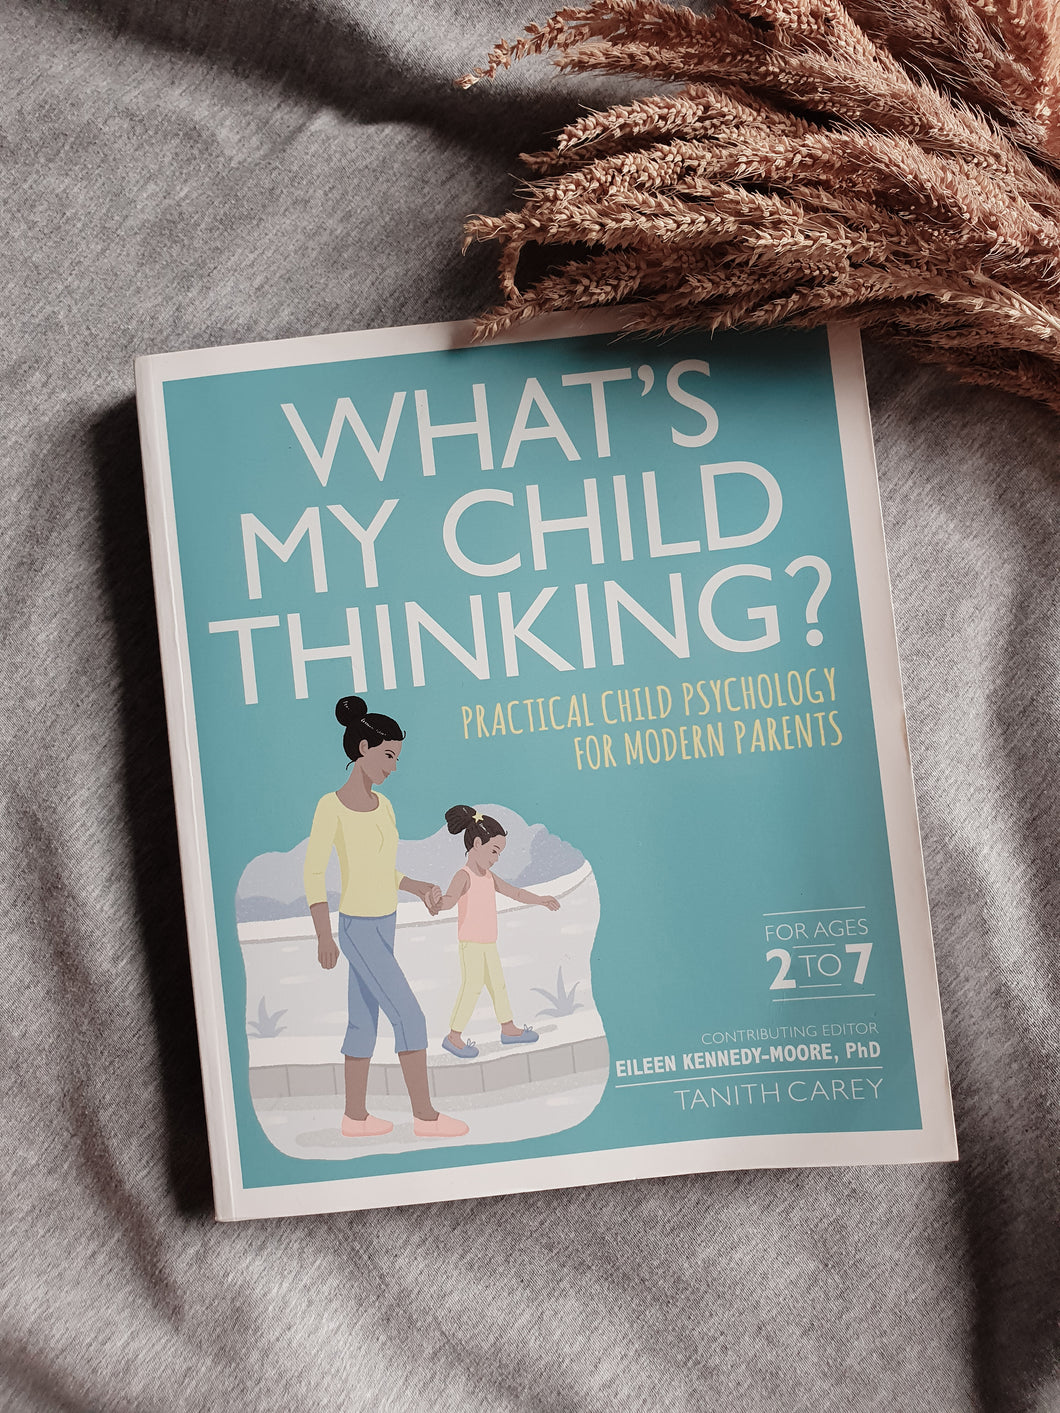 What's My Child Thinking? Practical Child Psychology For Modern Parents (For Ages 2 to 7)